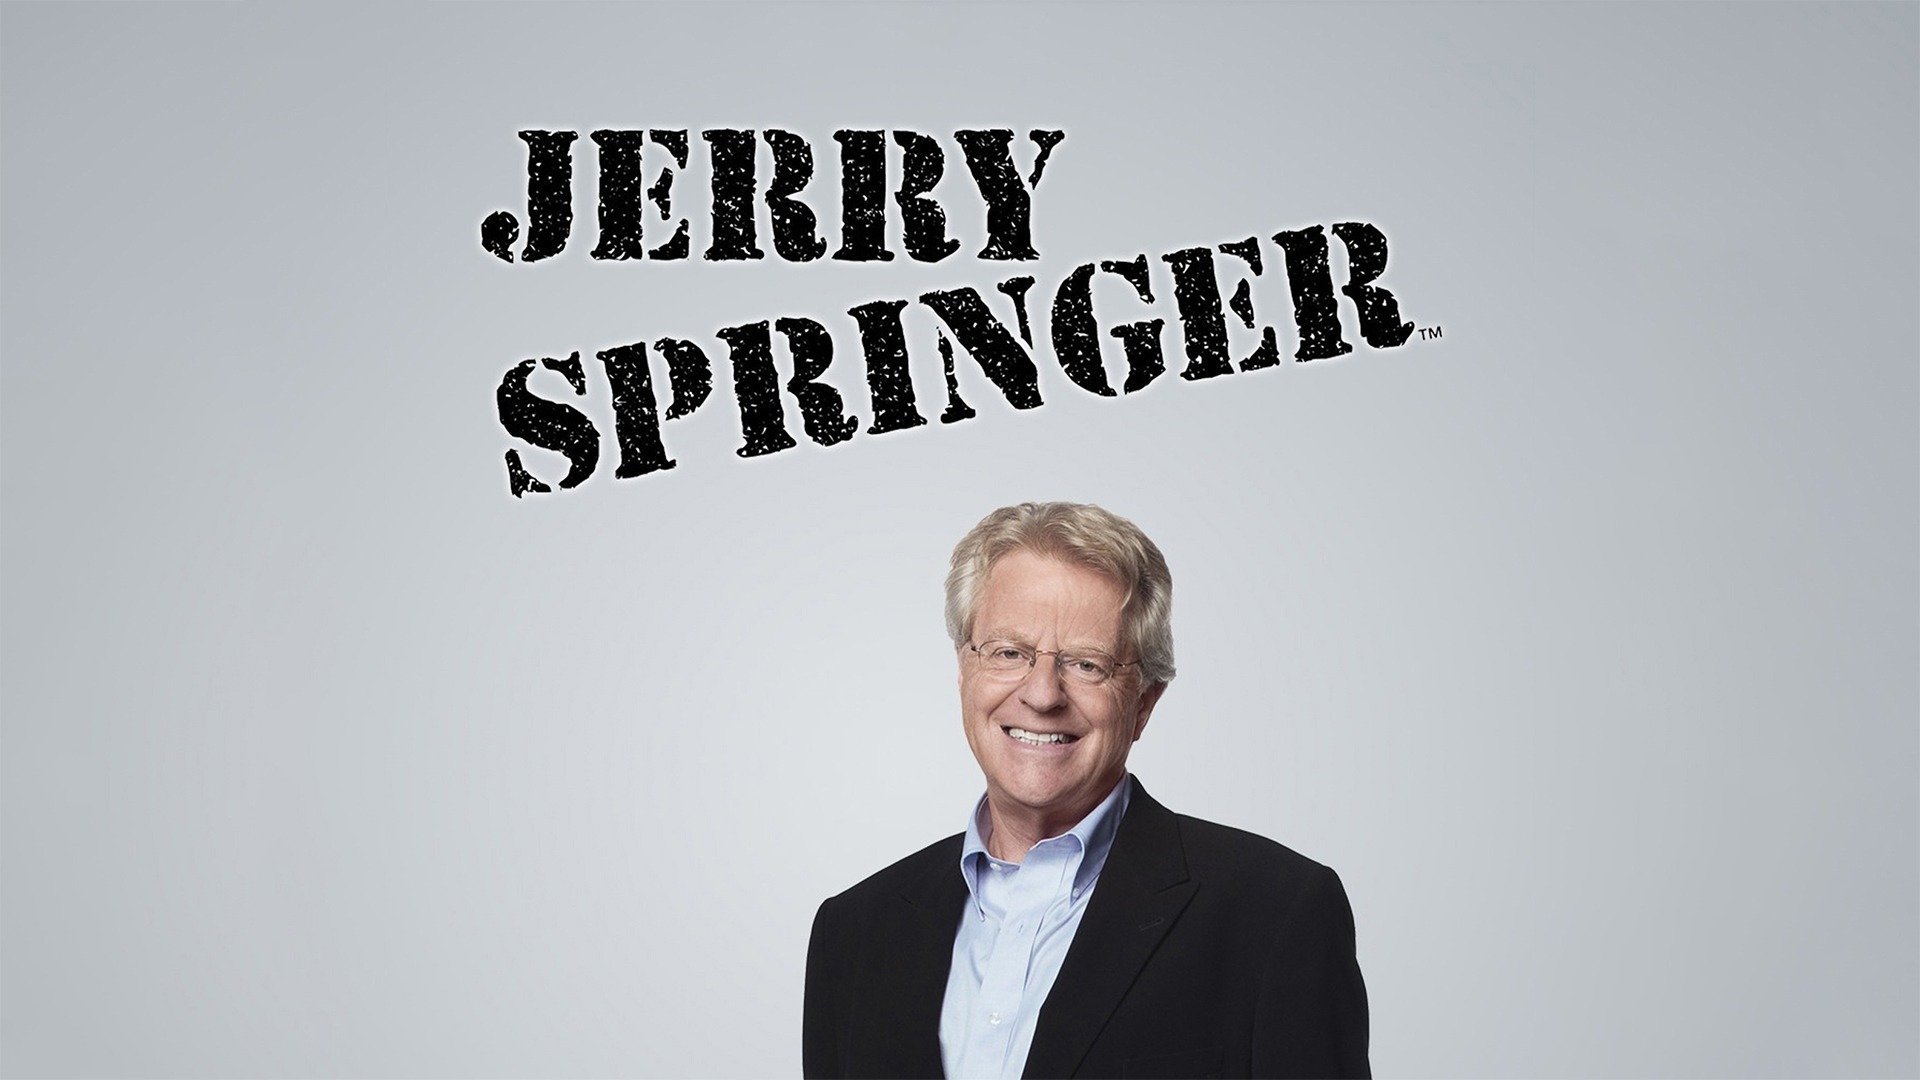 The Jerry Springer Show: Where to Watch and Stream Online